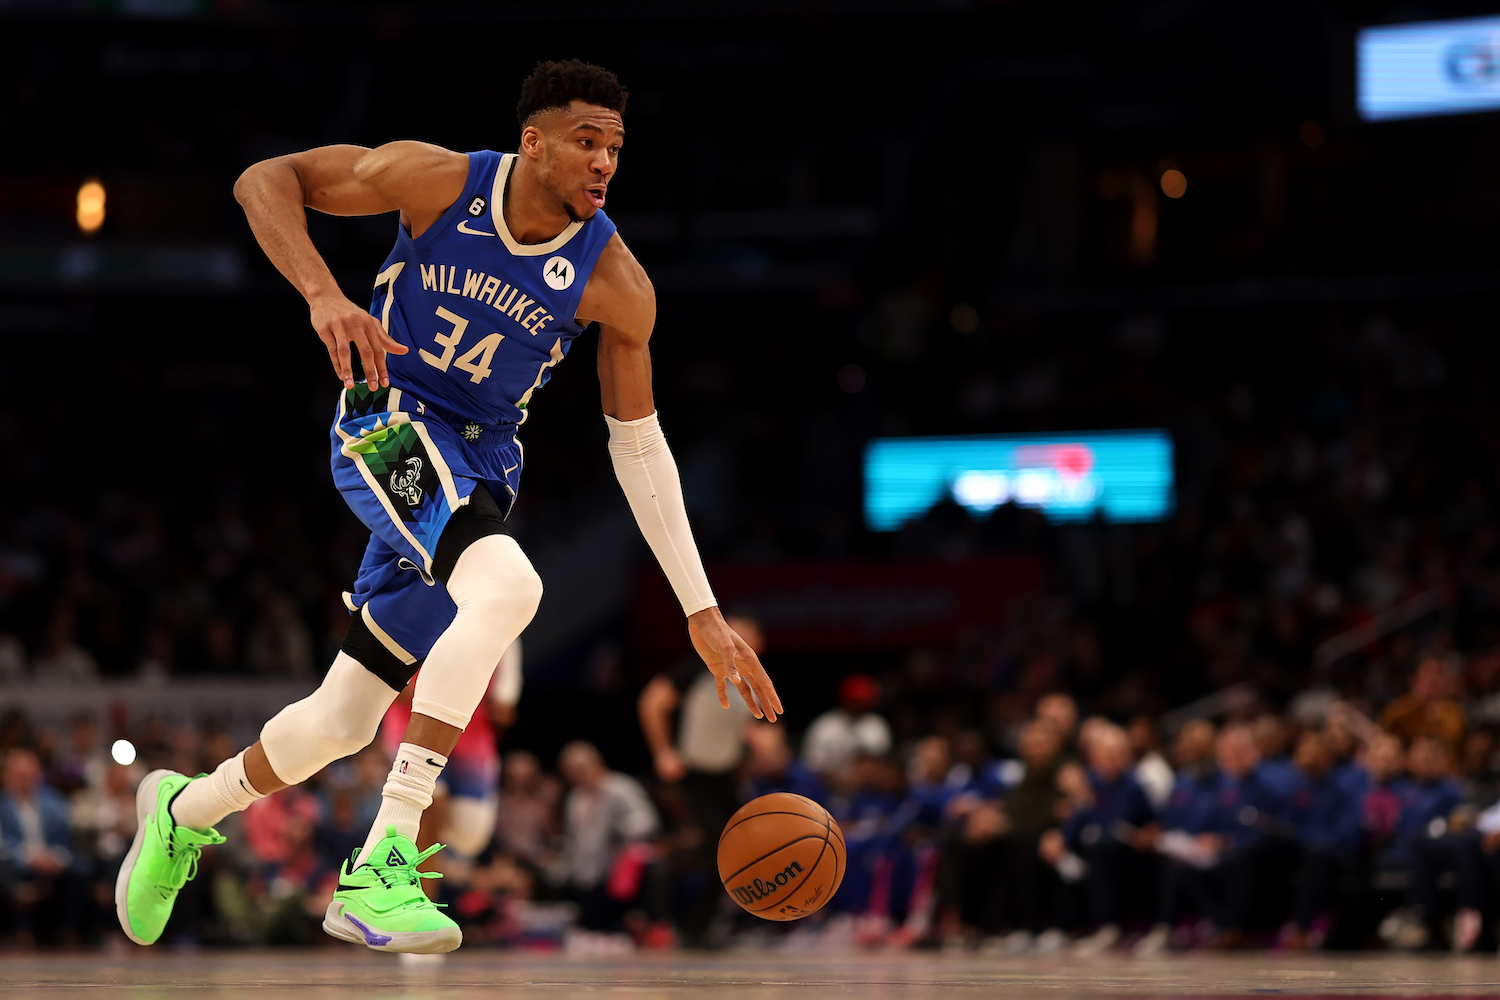 Jordan Poole is the new face coming up -Gilbert Arenas claims Golden State  Warriors intentionally leaked Draymond Green's punching video - Basketball  Network - Your daily dose of basketball